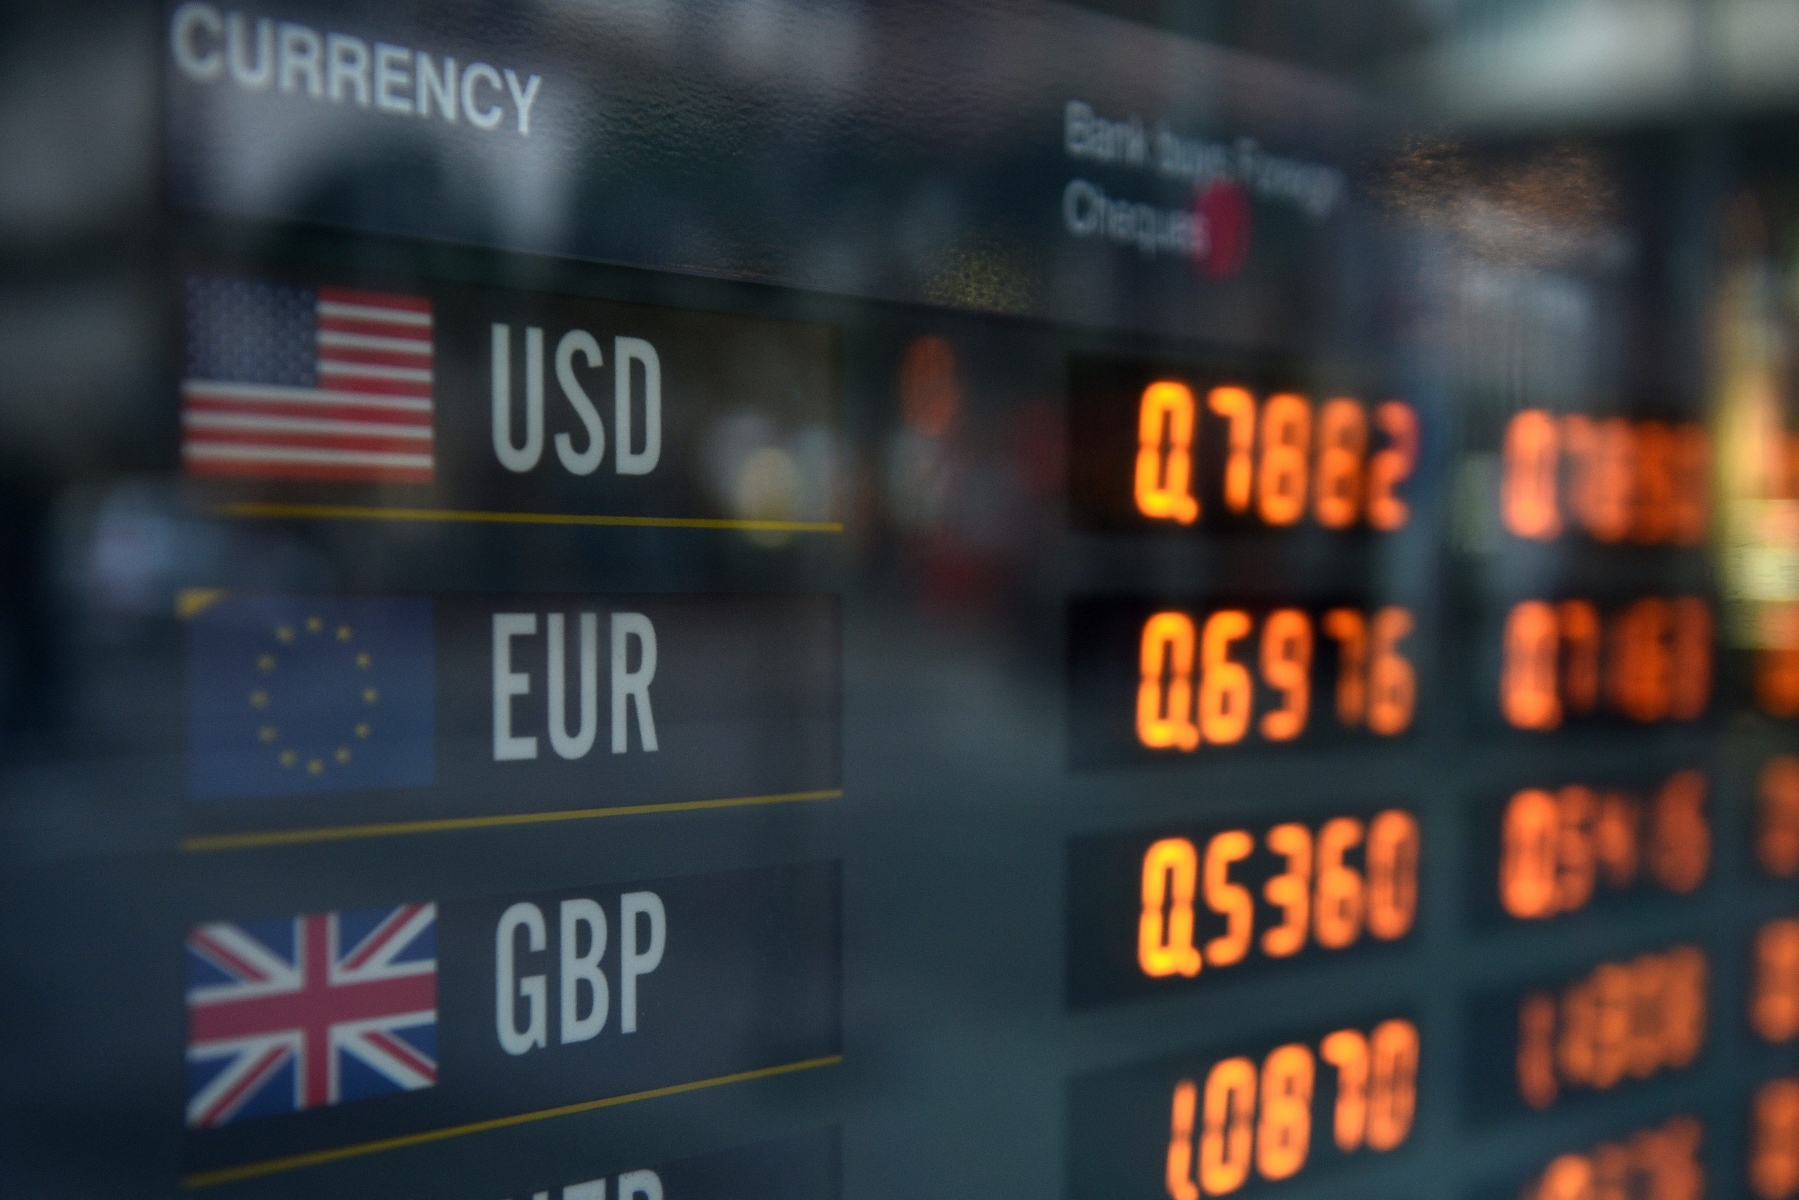 epa05385296 Foreign currency exchanges are seen displayed on a board in Sydney, New South Wales, Australia, 23 June 2016, as Britain heads to the polls to vote on whether to exit the European Union (EU), commonly abbreviated as 'Brexit' (British exit), analysts are tipping both the Euro and the Pound Sterling will fall if the vote to exit succeeds.  EPA/DAN HIMBRECHTS AUSTRALIA AND NEW ZEALAND OUT AUSTRALIA FOREIGN EXCHANGE BREXIT